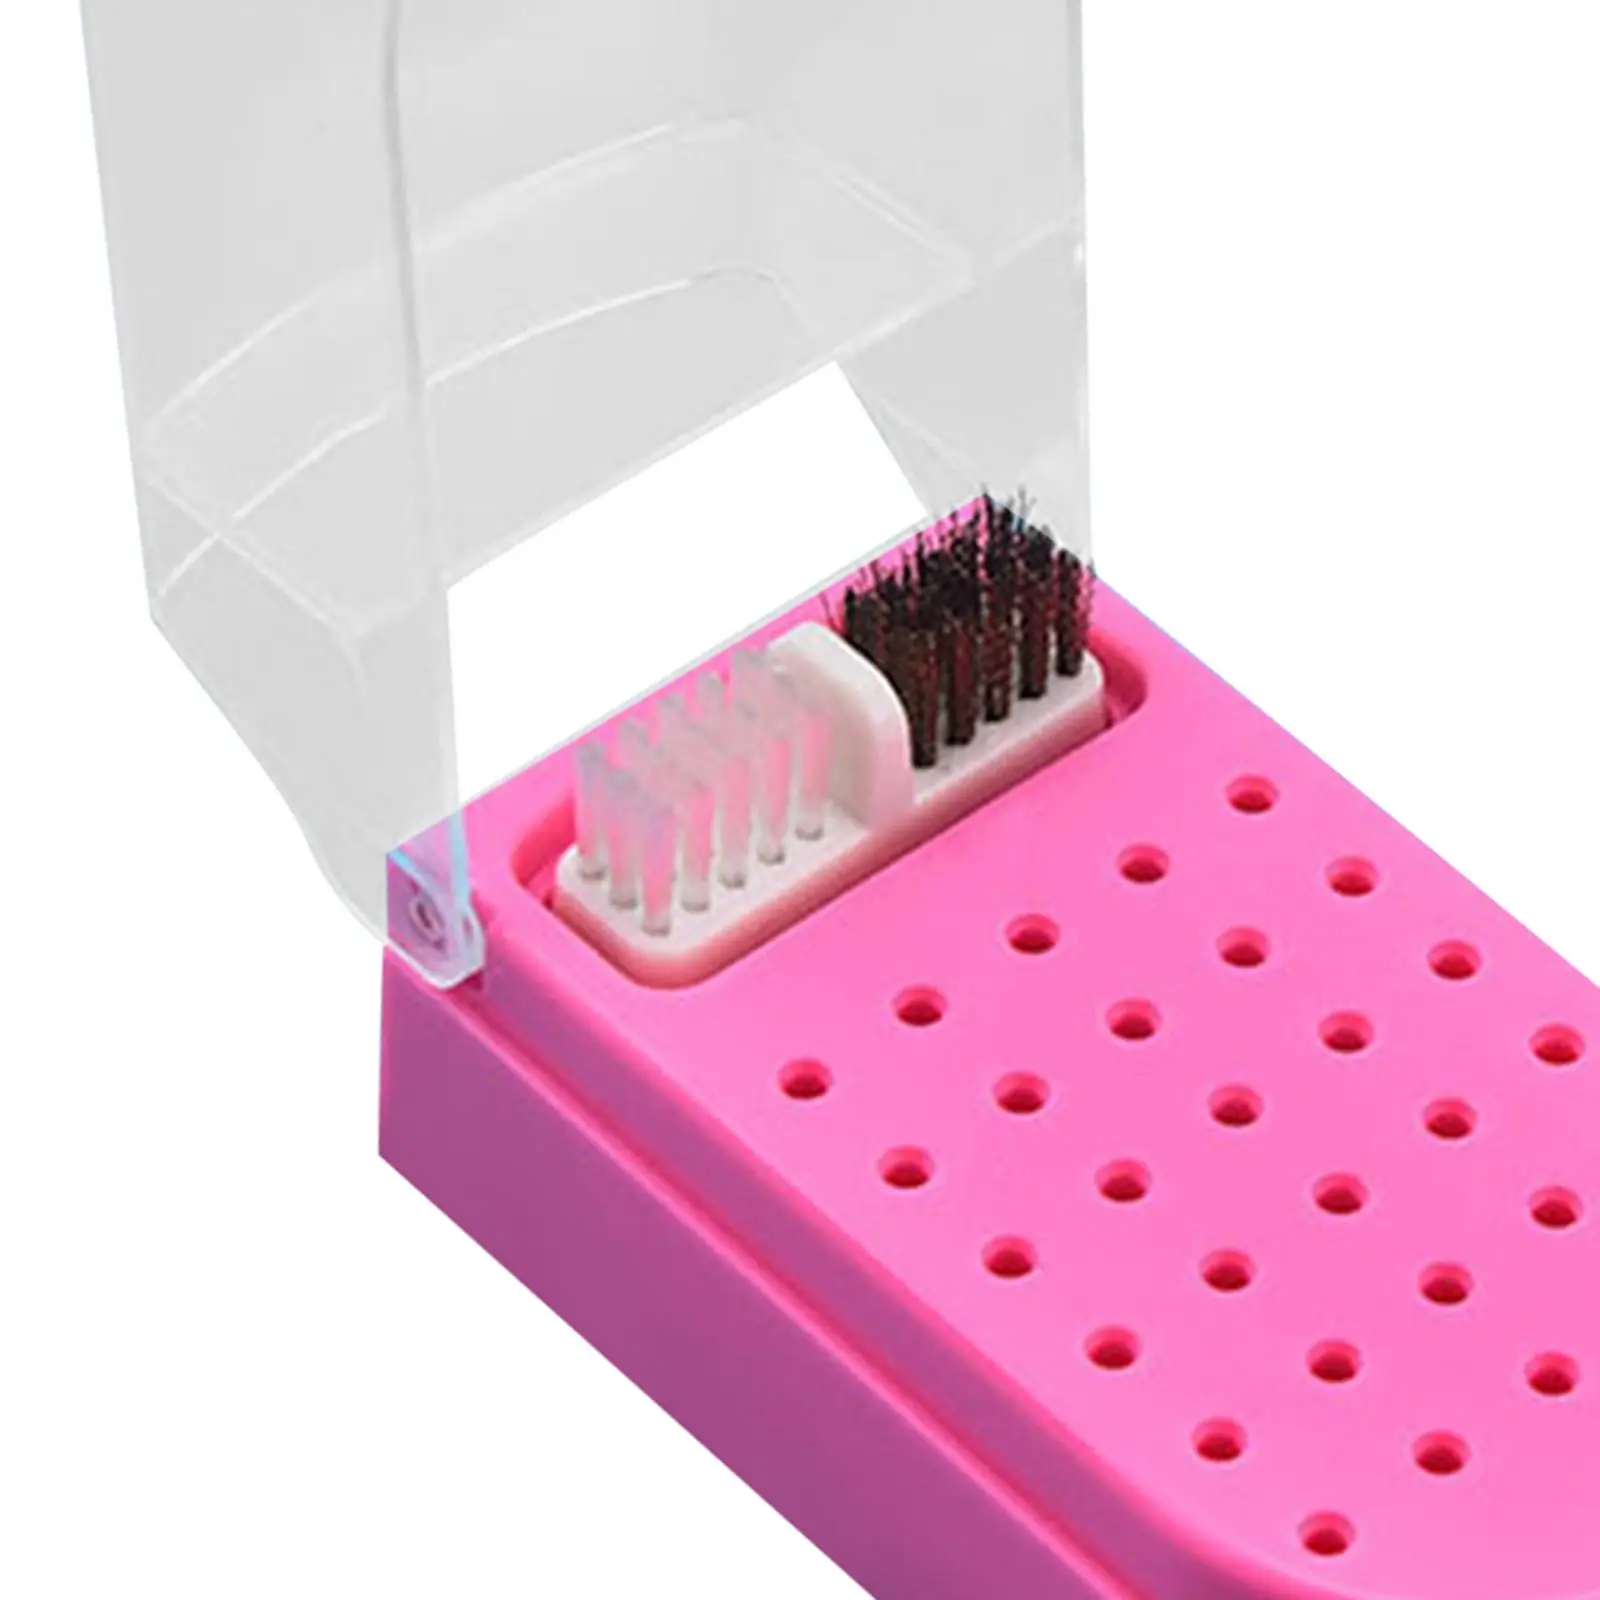 Nail Drill Bit Holder with Clear Lid Display Stand Grinding Case Nail Salon Waterproof 30 Holes Stand Case Manicure Accessories